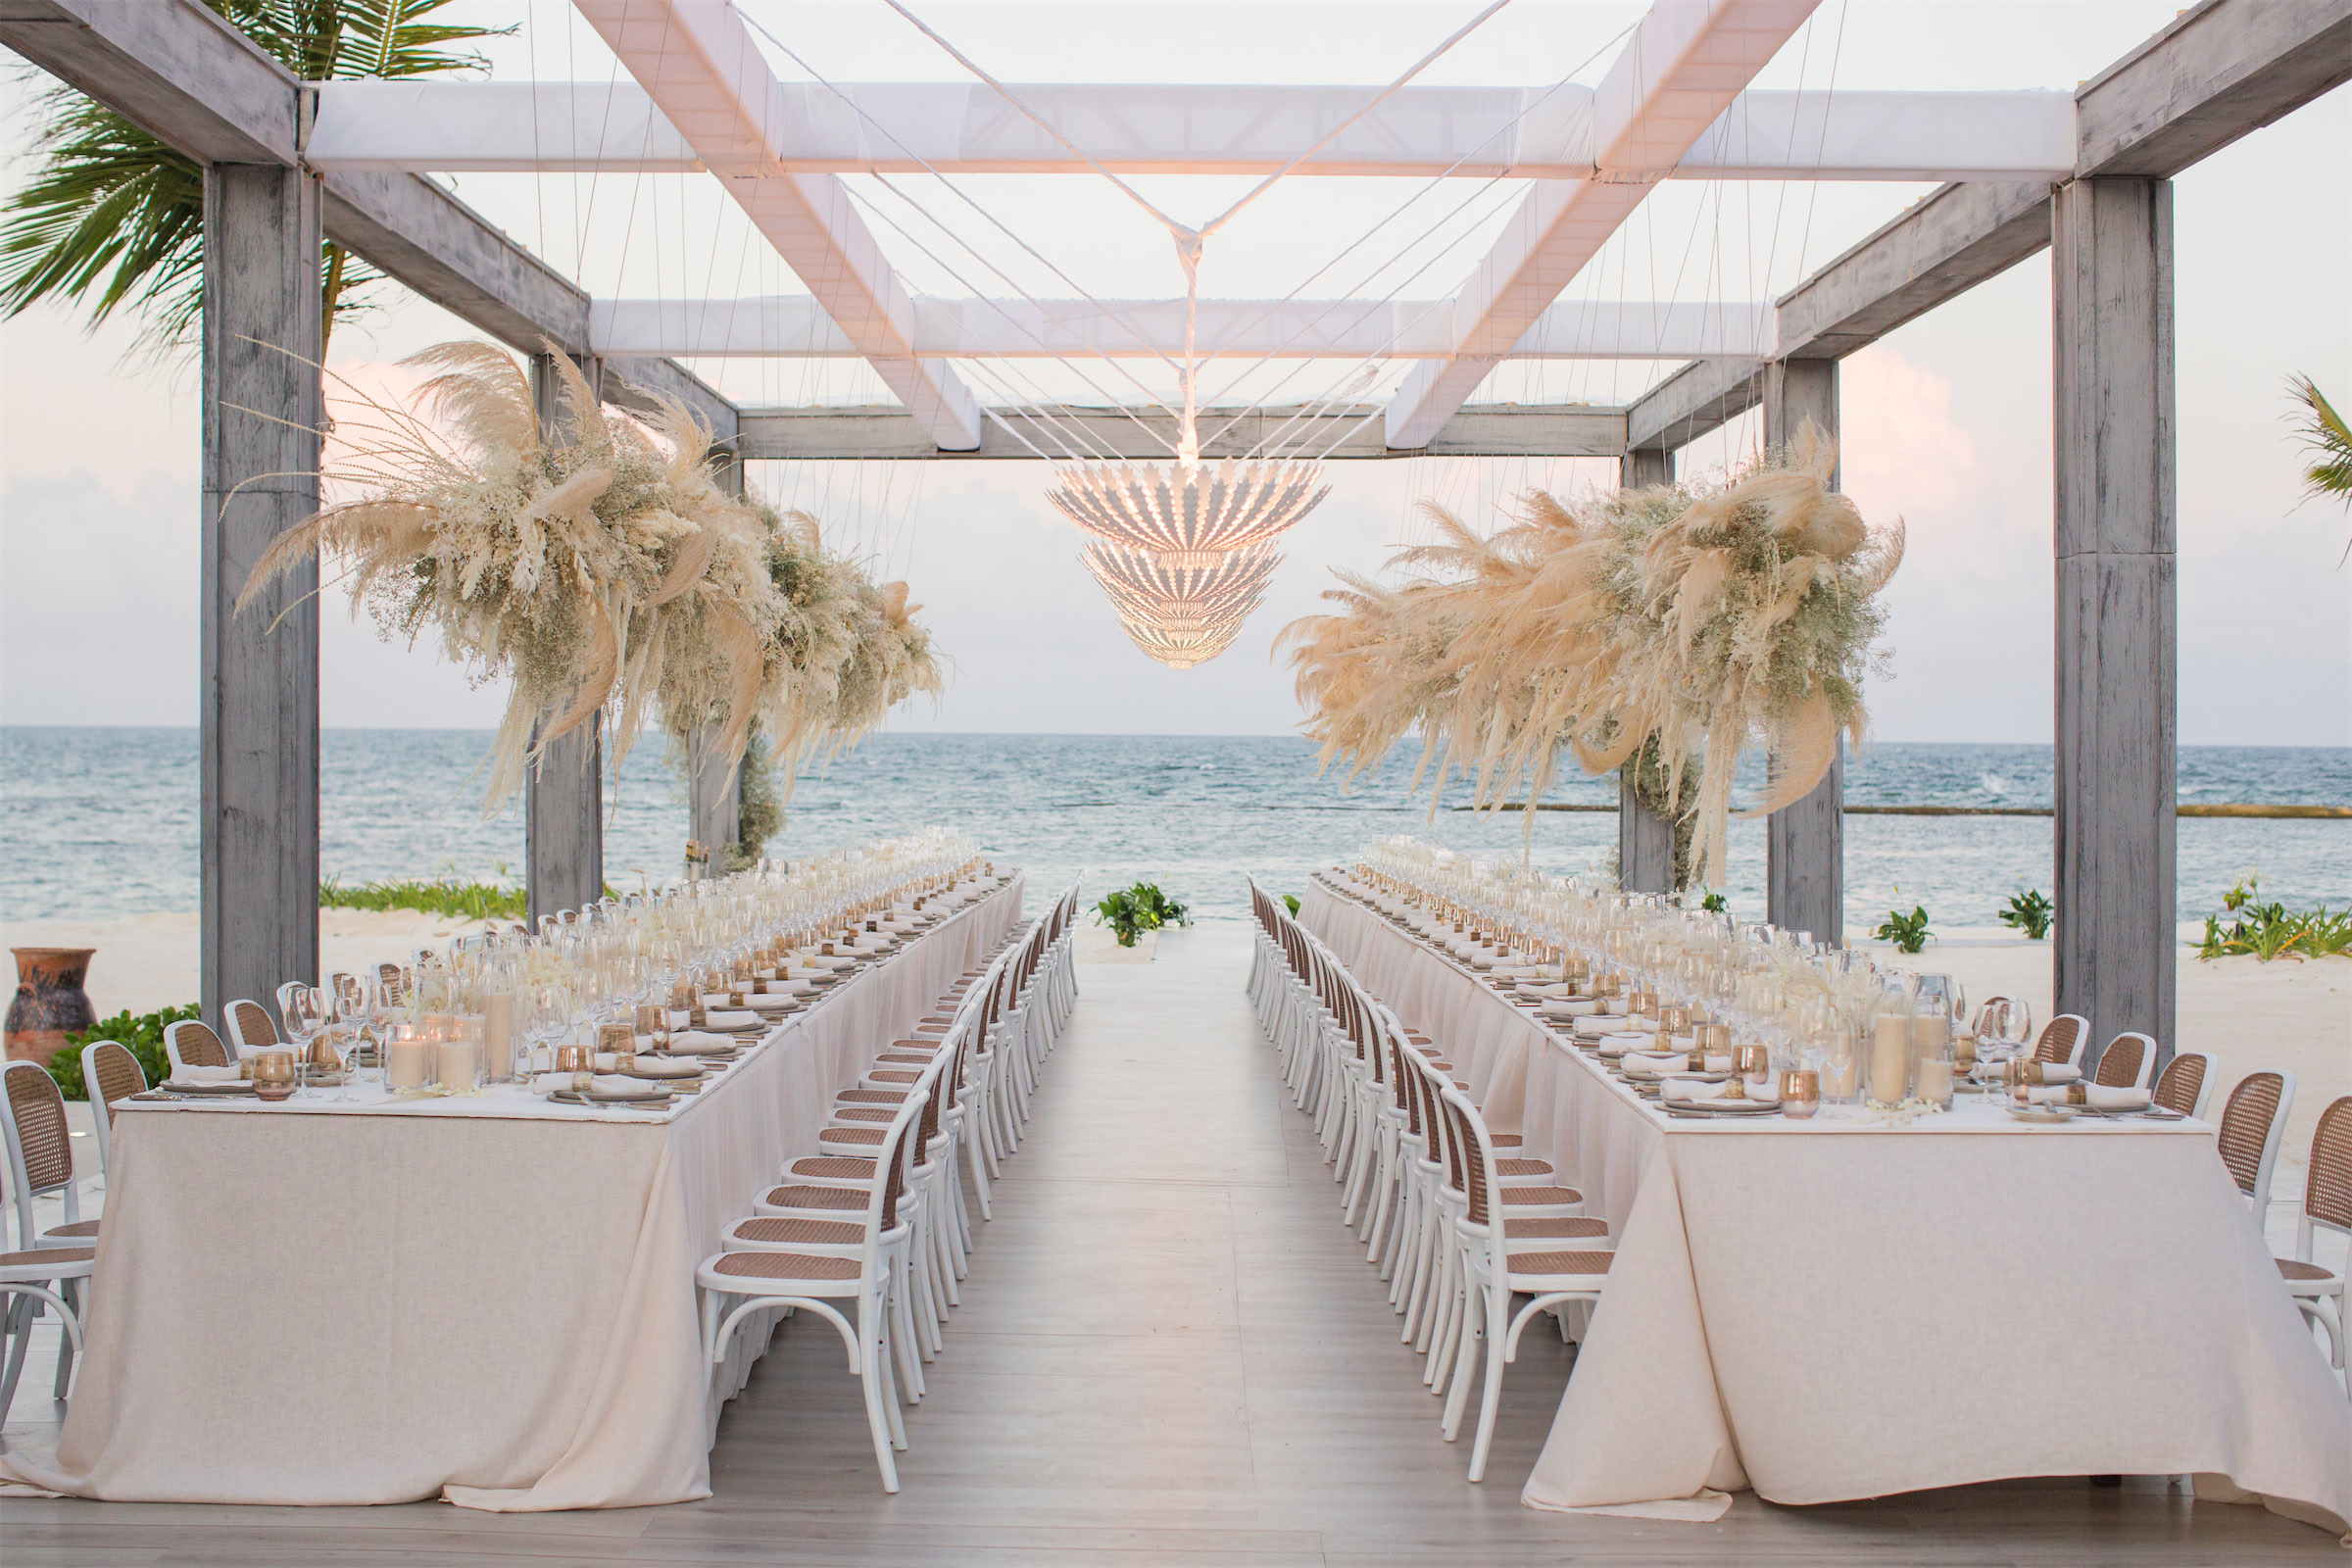 The Most Beautiful Wedding Venues in the U.S.